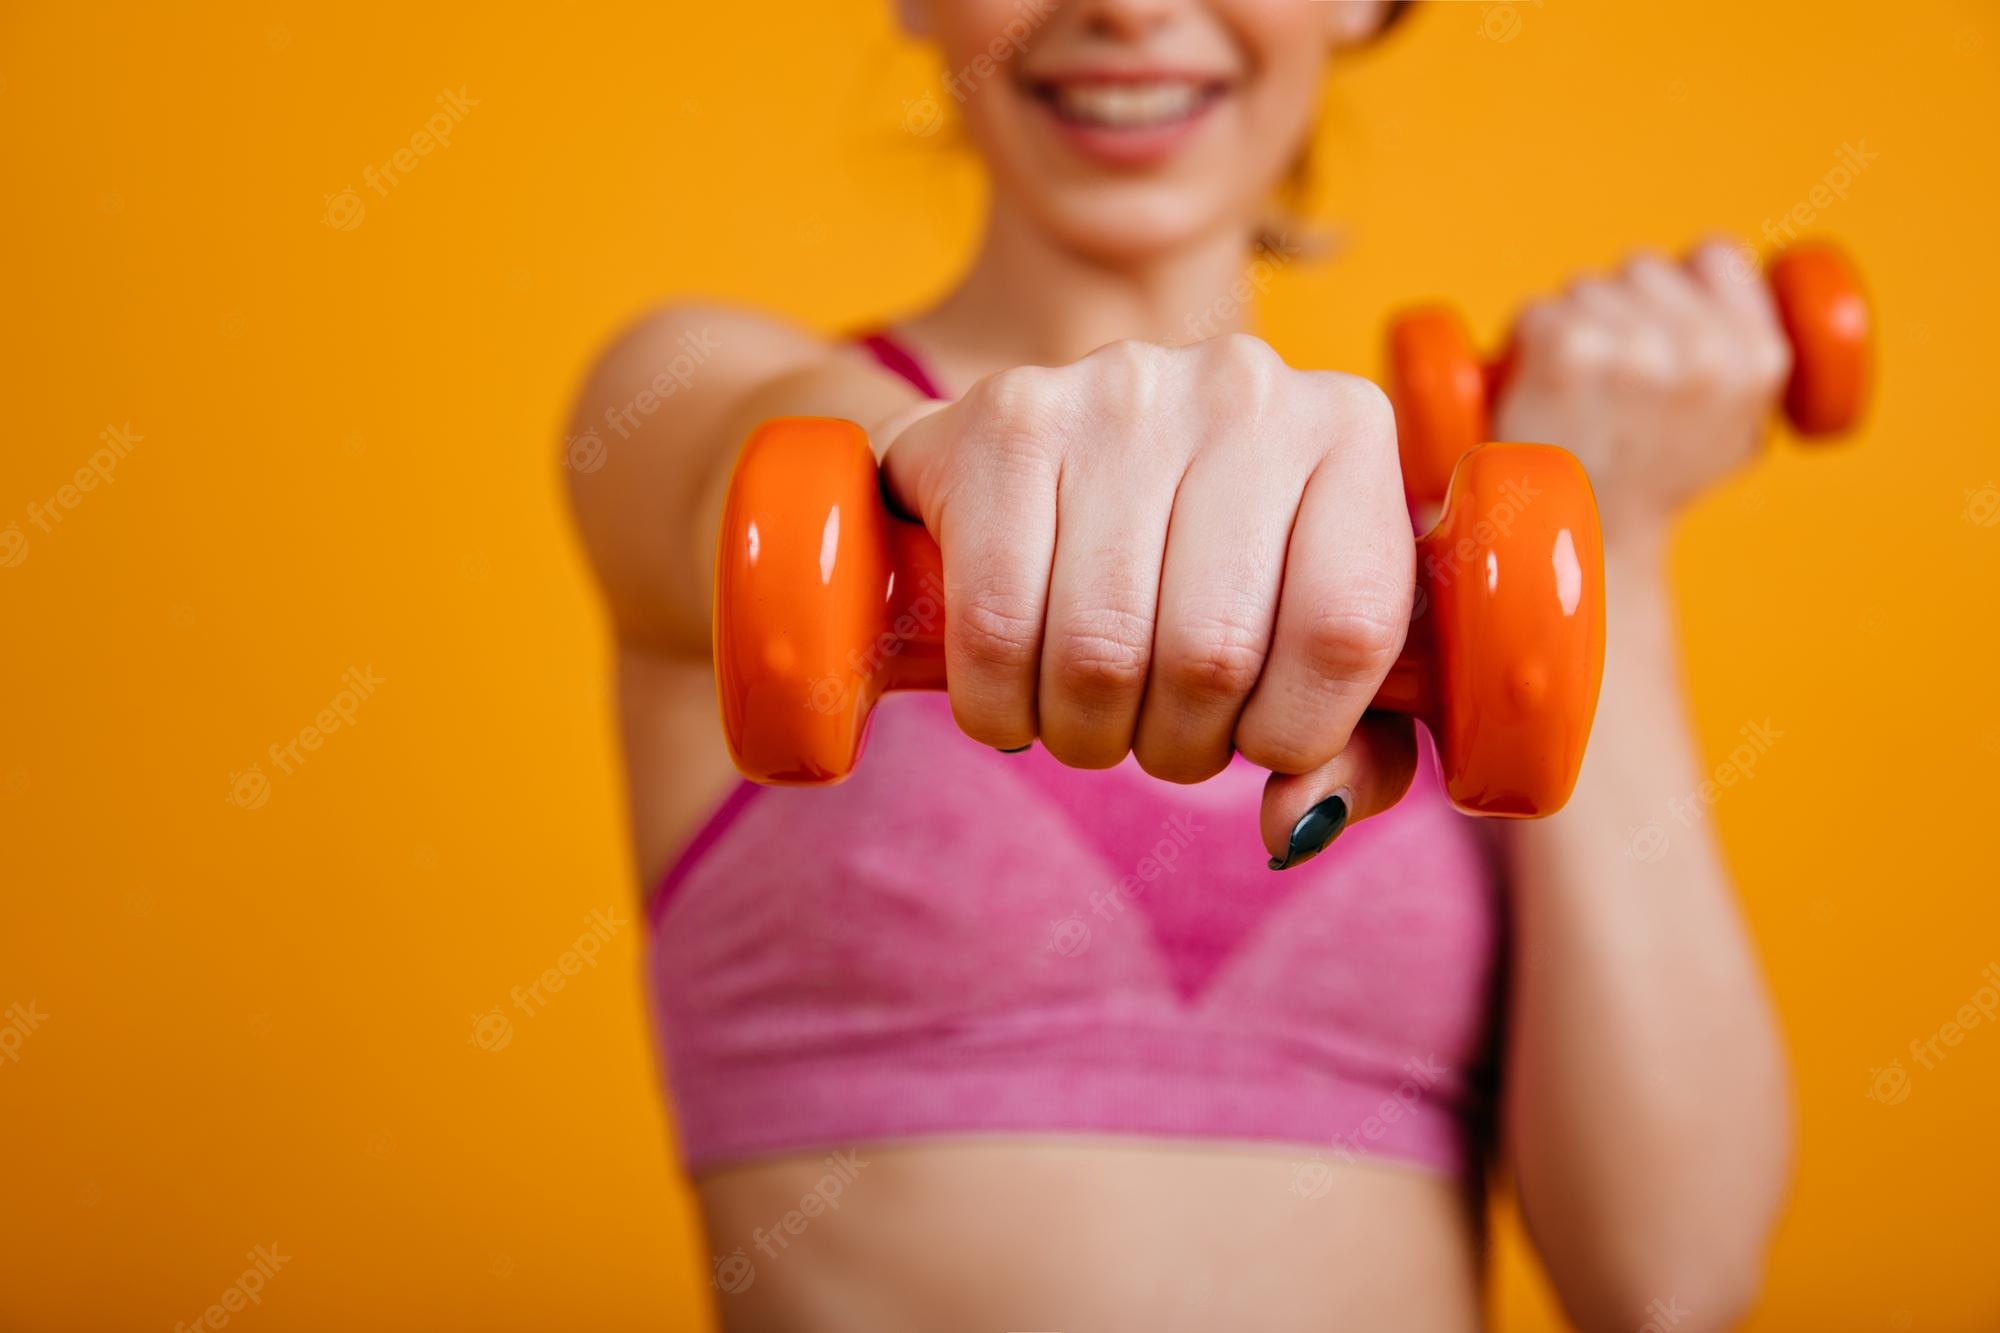 [Image: smiling-girl-posing-with-dumbbels-athlet...0.3&view=1]